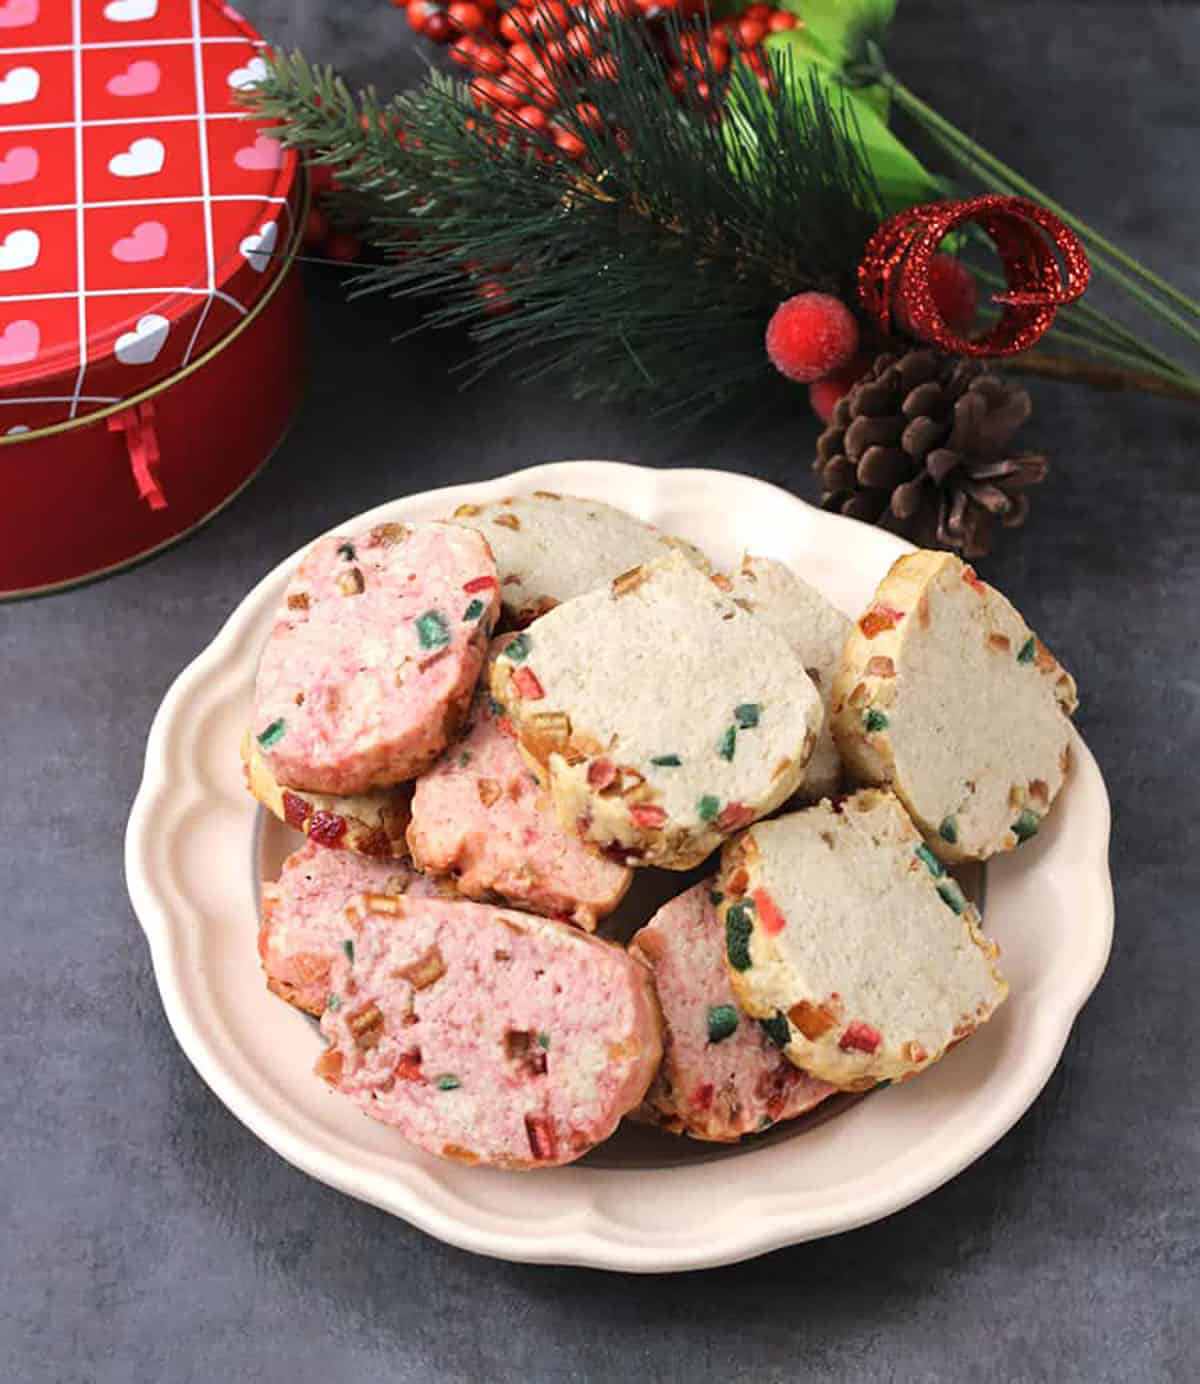 a plateful of unique holiday cookies with candied fruits (tutti frutti), rose and vanilla